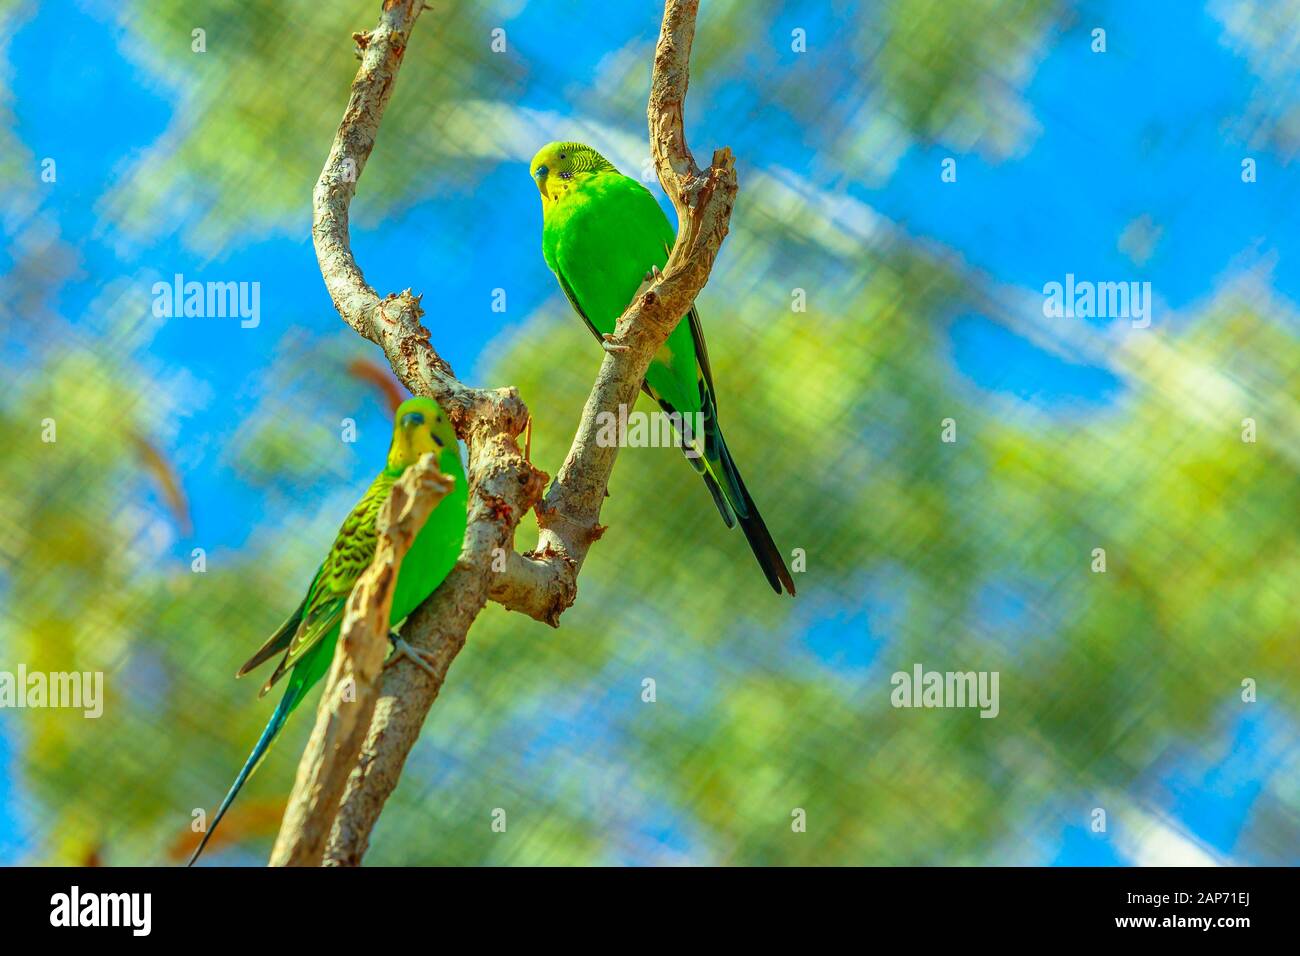 Bottom view of two Budgerigars, Melopsittacus undulatus, a small bright green parrots on a tree with blurred nature background. Desert Park at Alice Stock Photo